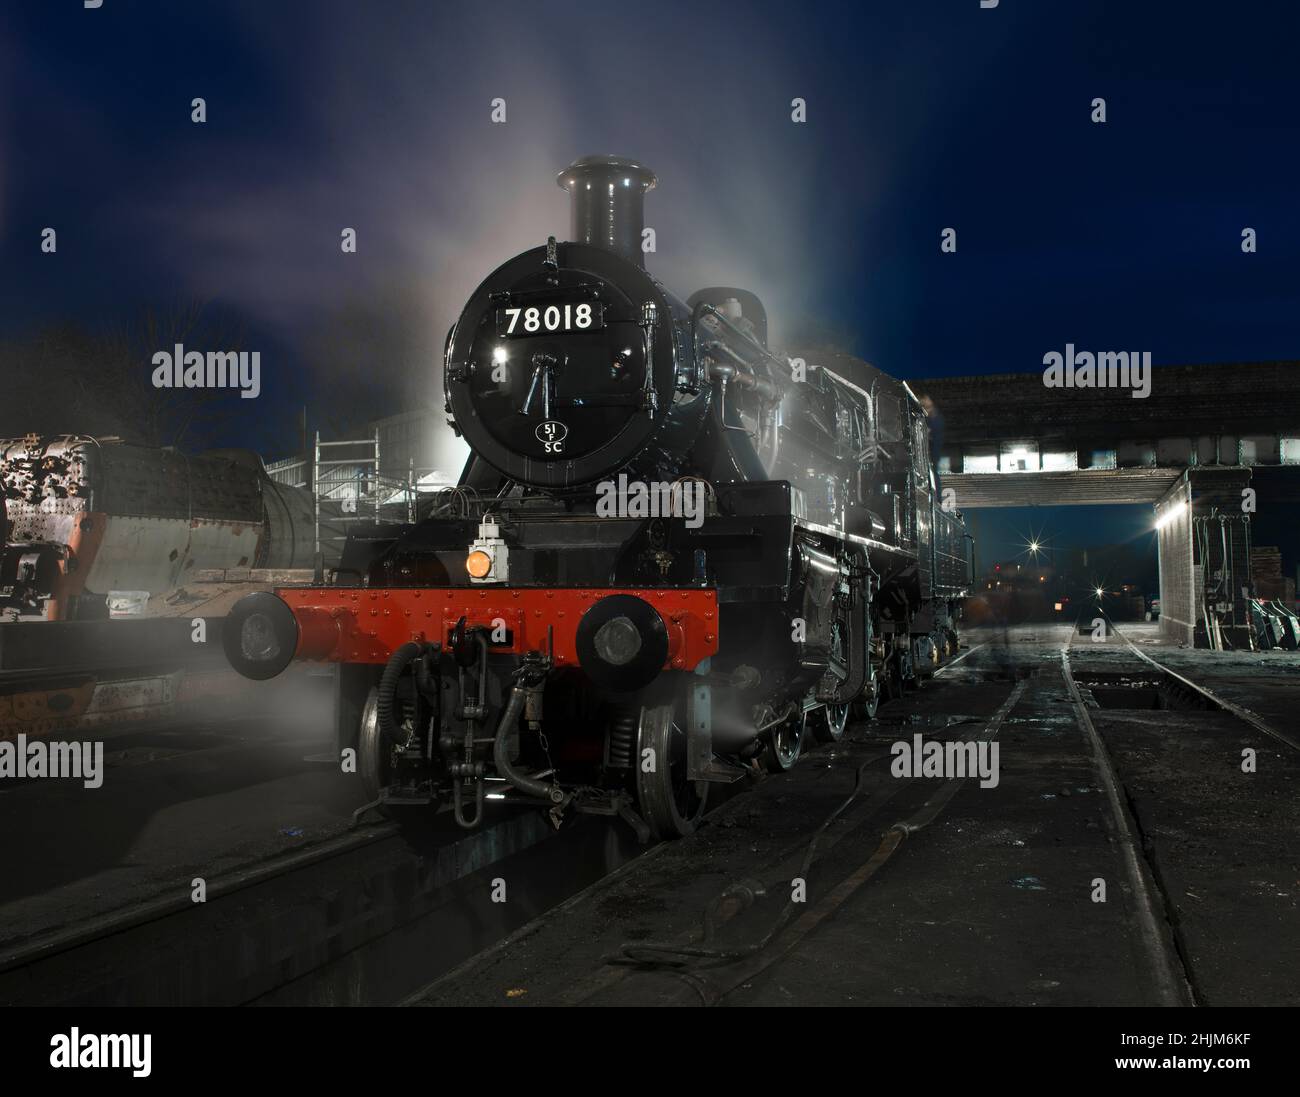 Great Central Railway, Loughborough, Leicestershire, UK, January 28th 2022, British Railways Standard 2 78018 at night in the yard Stock Photo